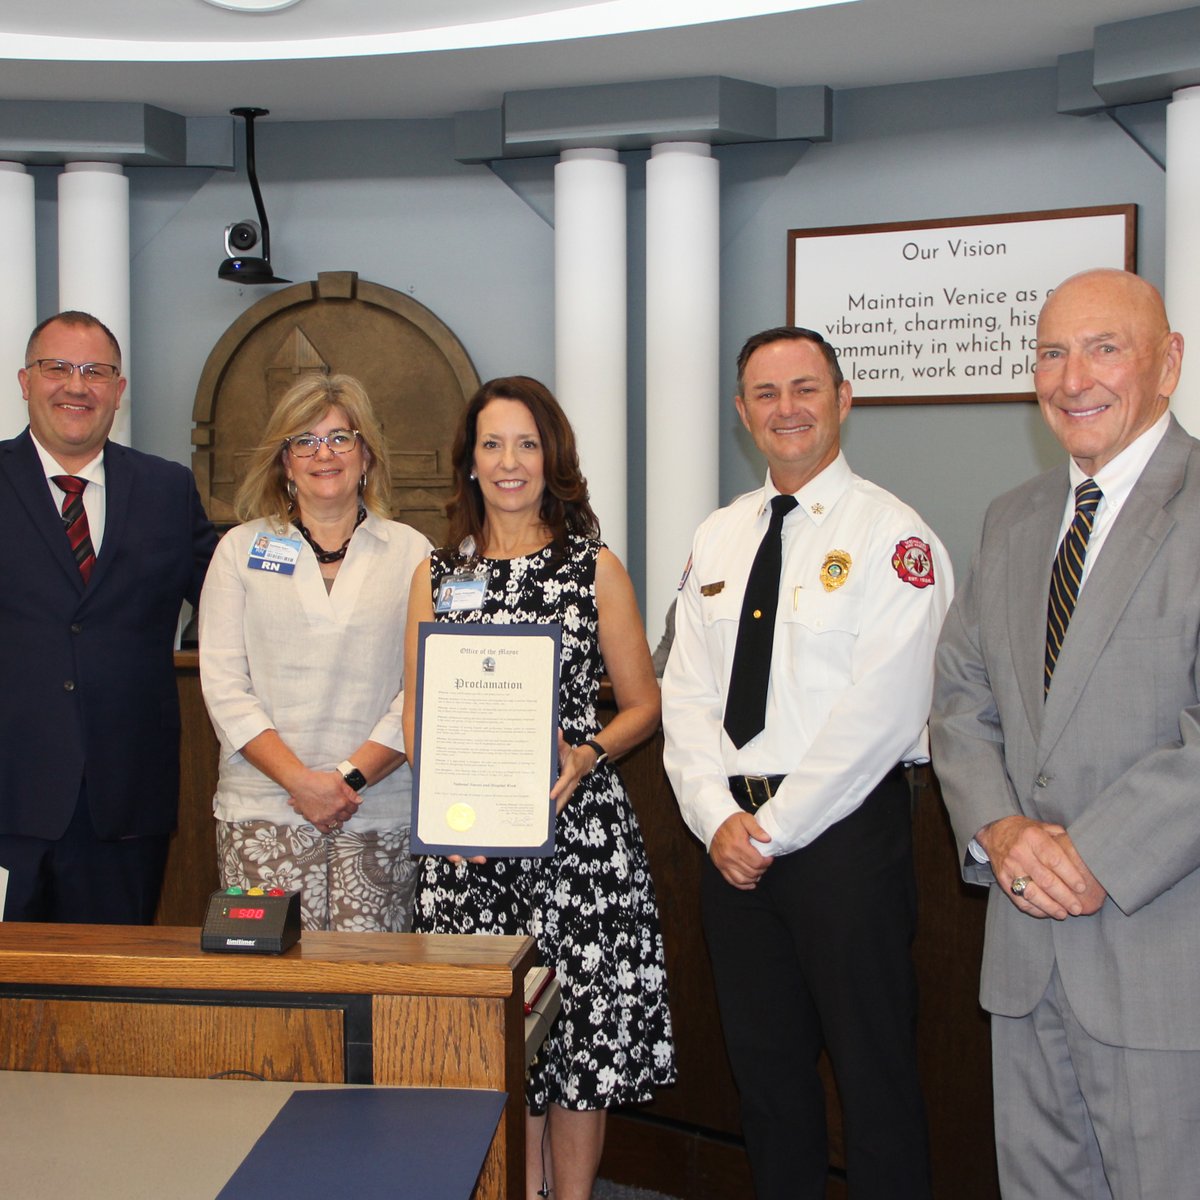 This week, on behalf of SMH-Venice, Julie Polaszek, CNO & Cynthia Carr proudly accepted a proclamation from Nick Pachota, Mayor of Venice. The proclamation honors #HospitalWeek & #NursesWeek, recognizing the life-saving care that nurses & hospital staff provide to those in need.